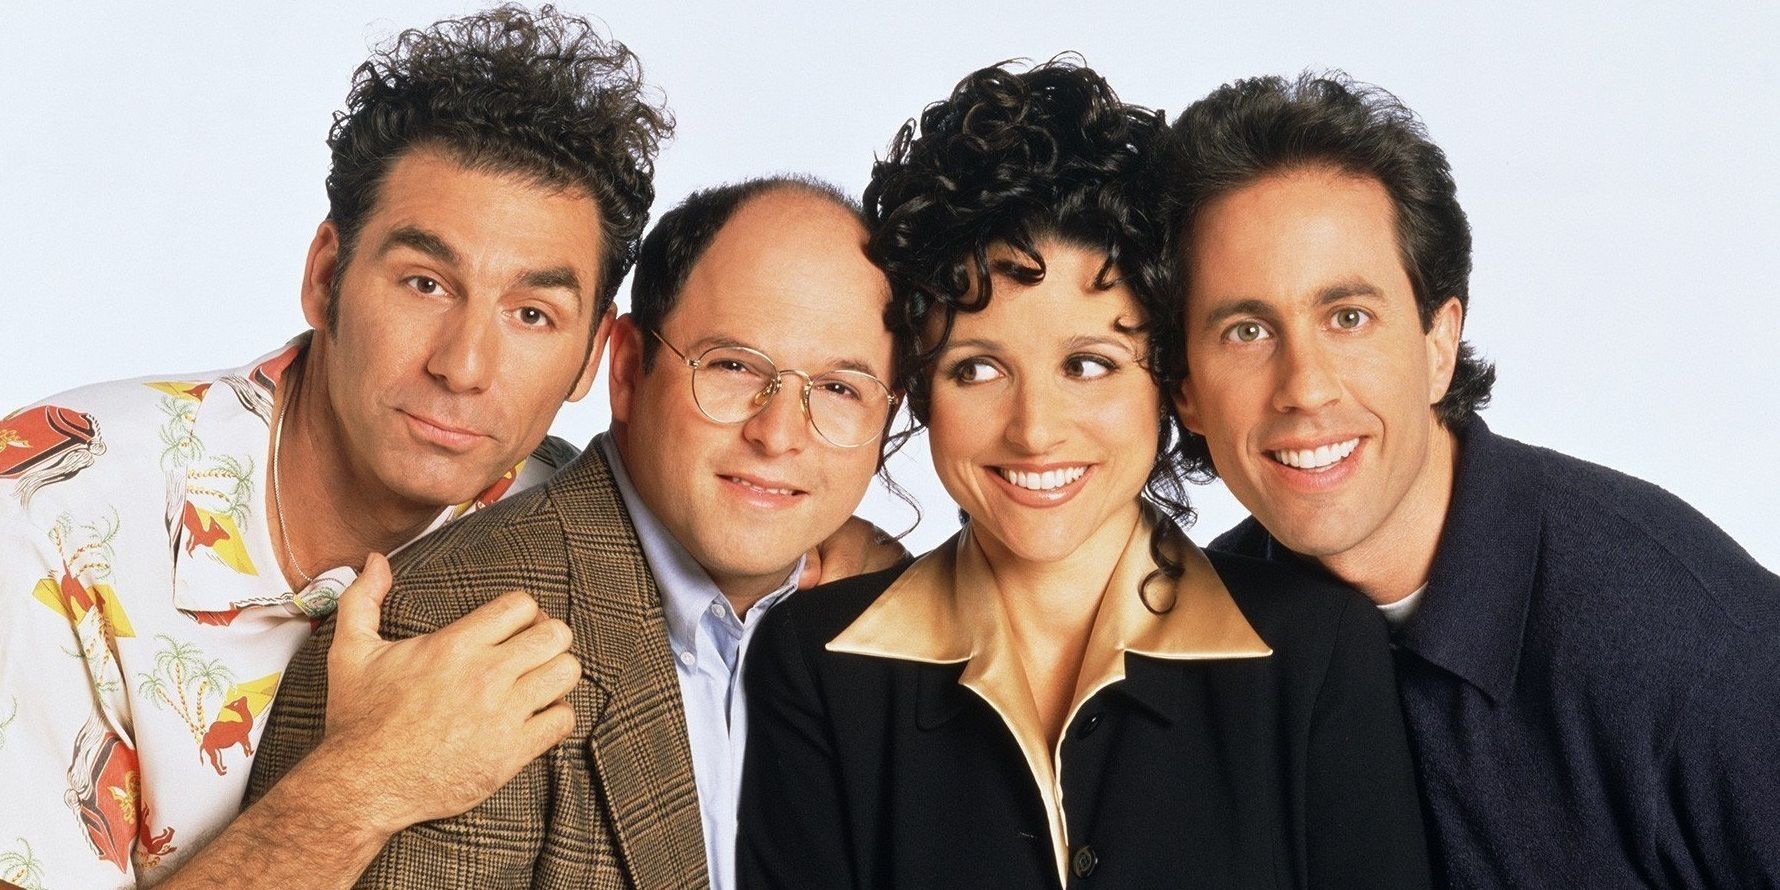 How To Watch Seinfeld Now That It’s Streaming Again